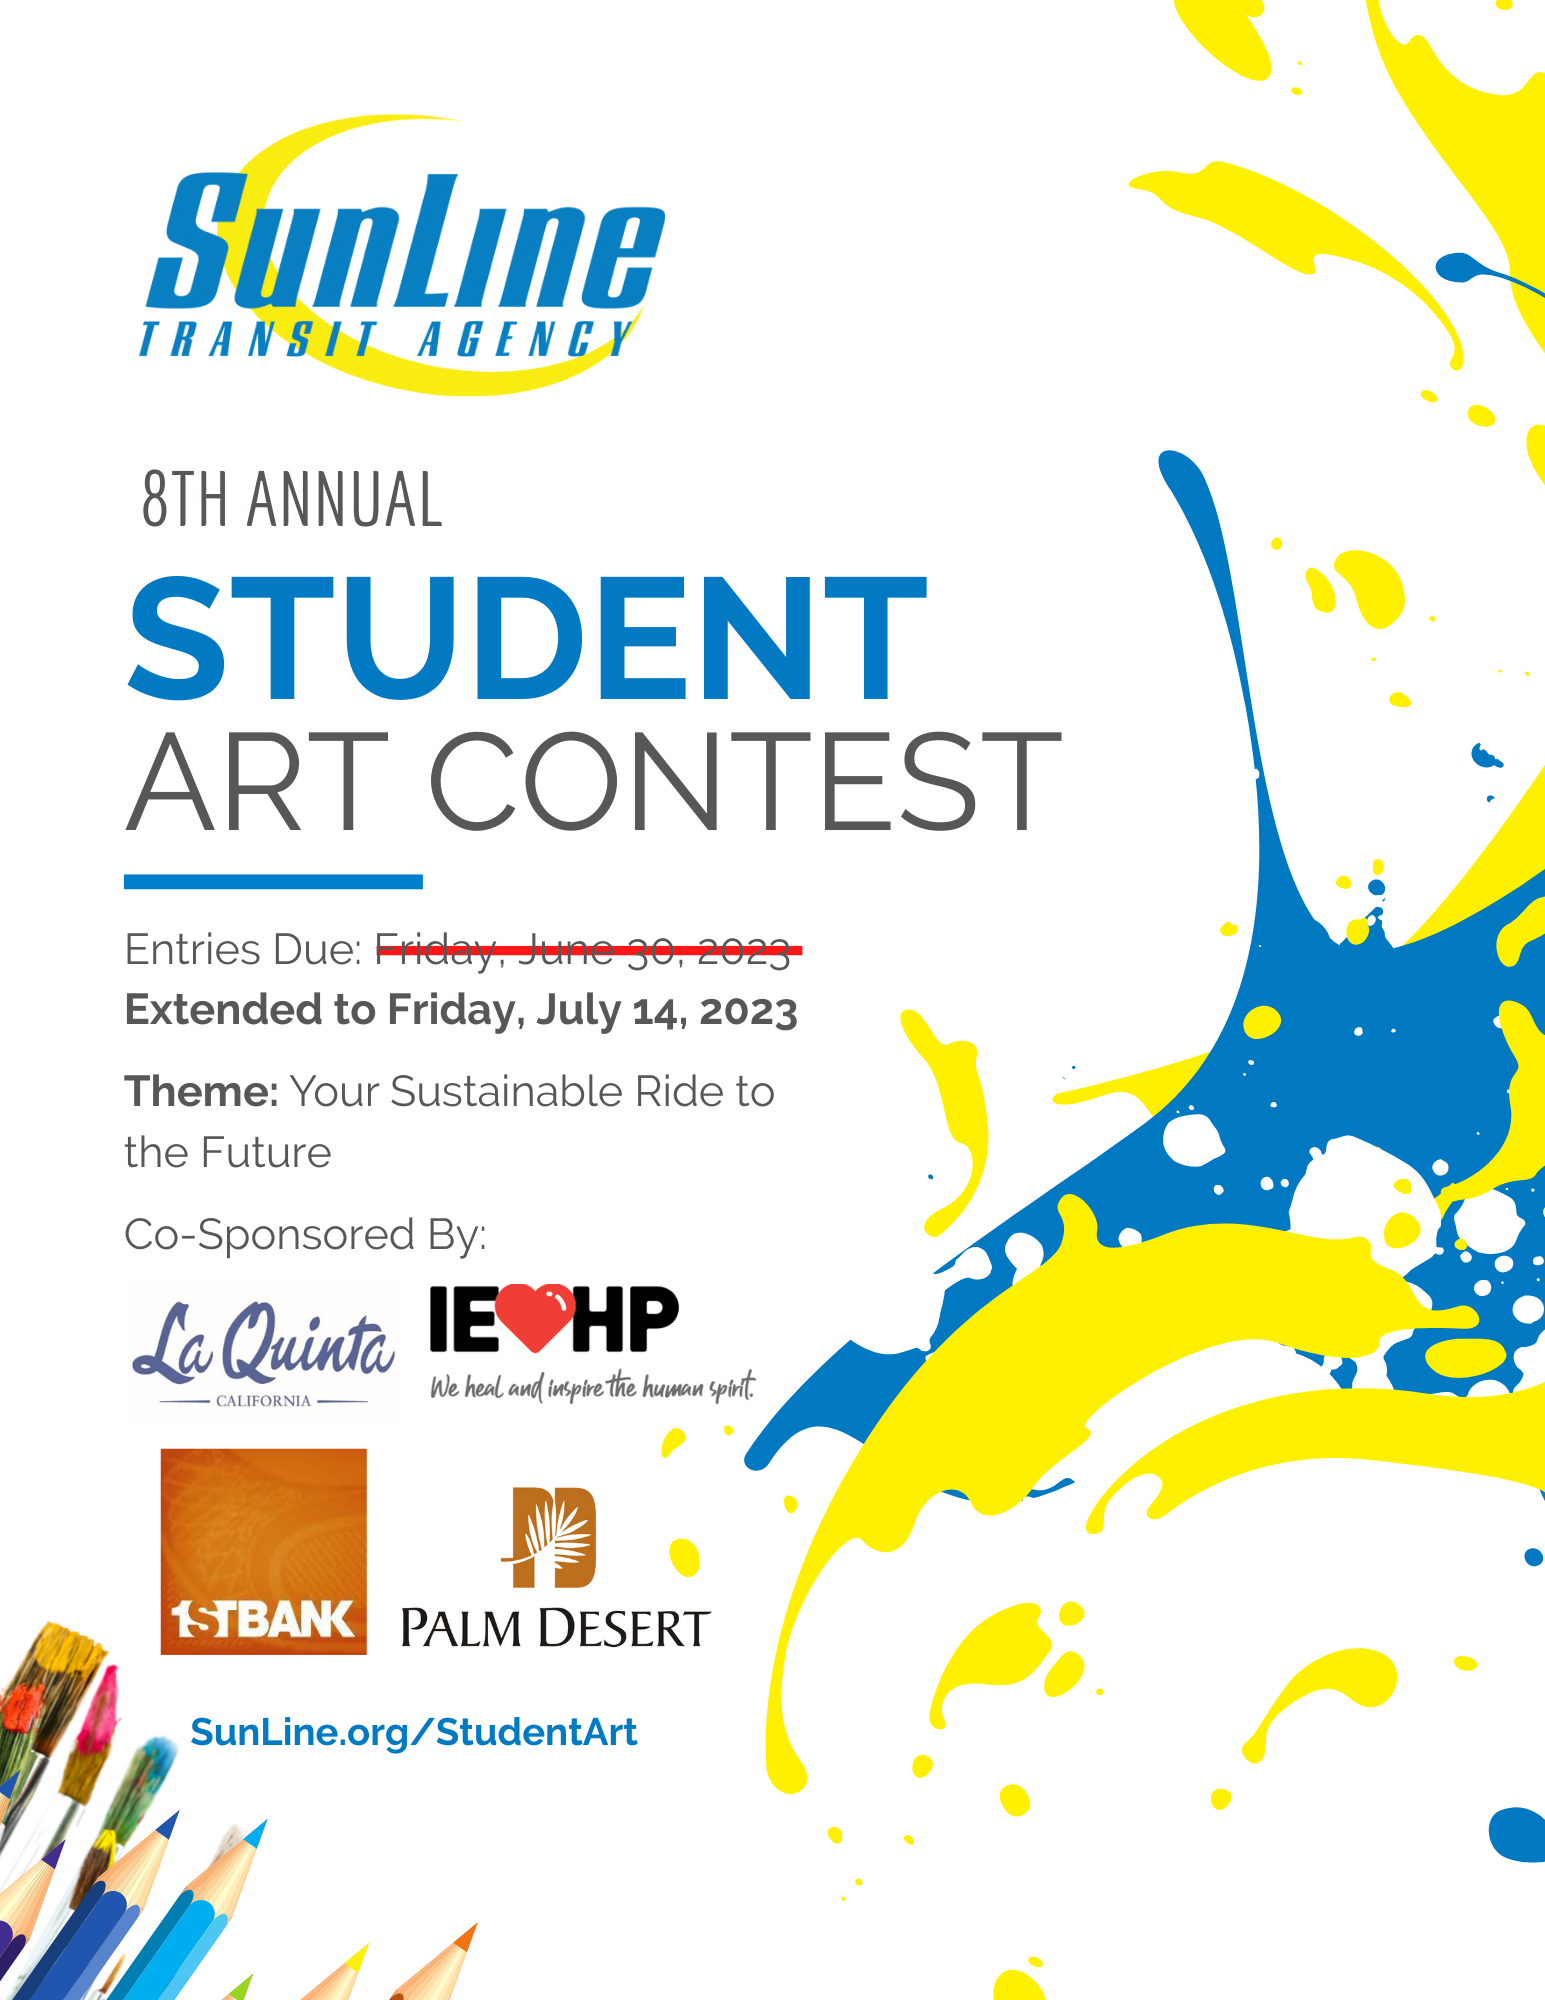 SunLine's 8th Annual Student Art Contest Flyer 2023